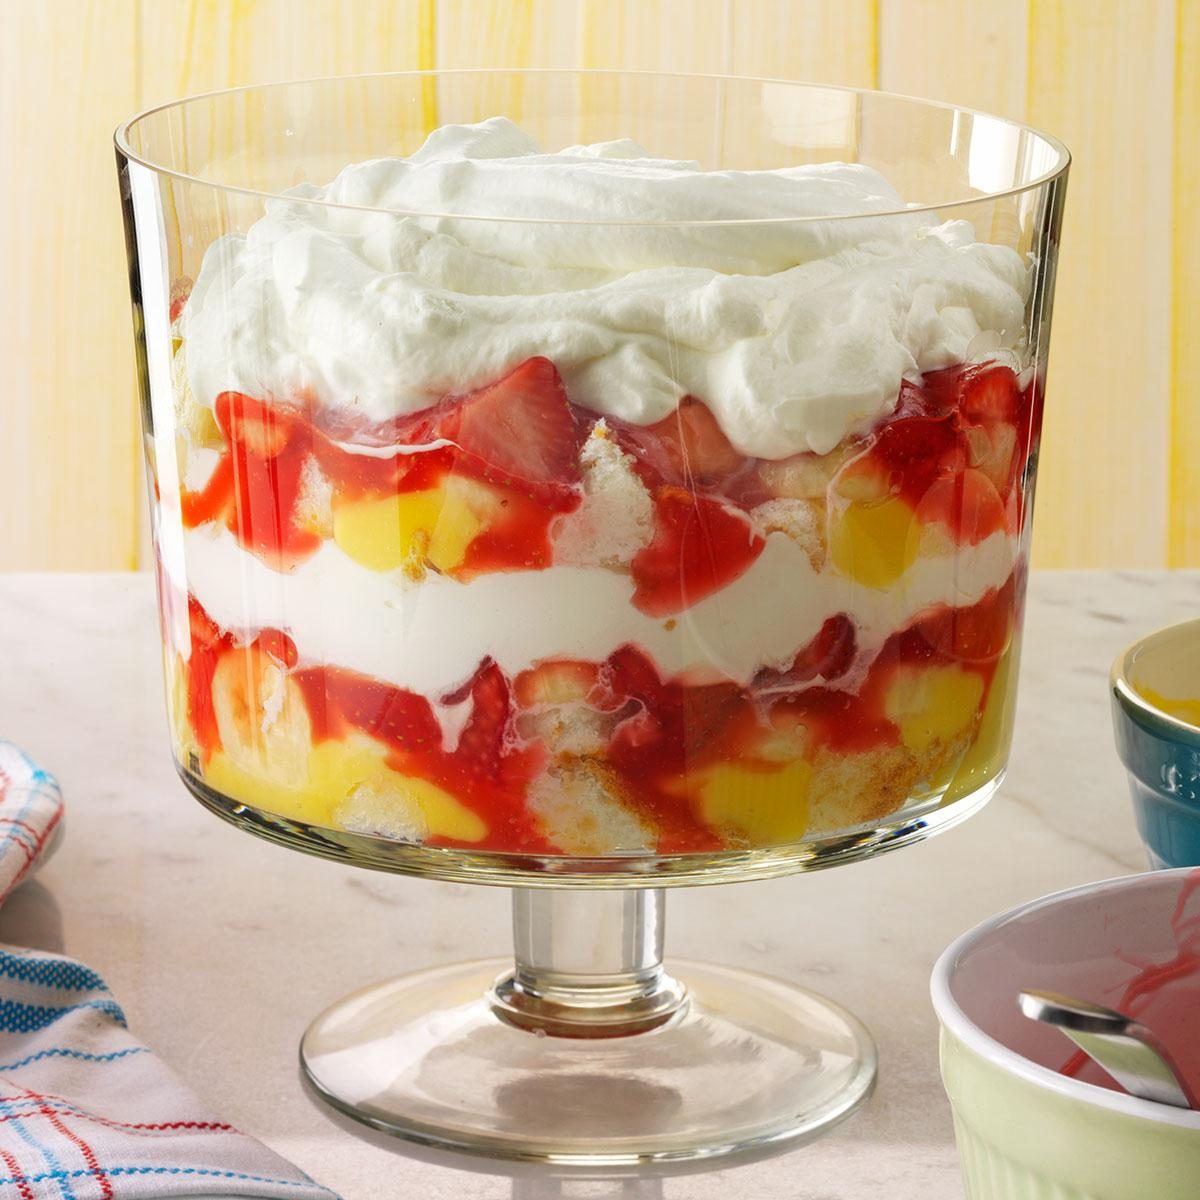 Image result for strawberry trifle recipes